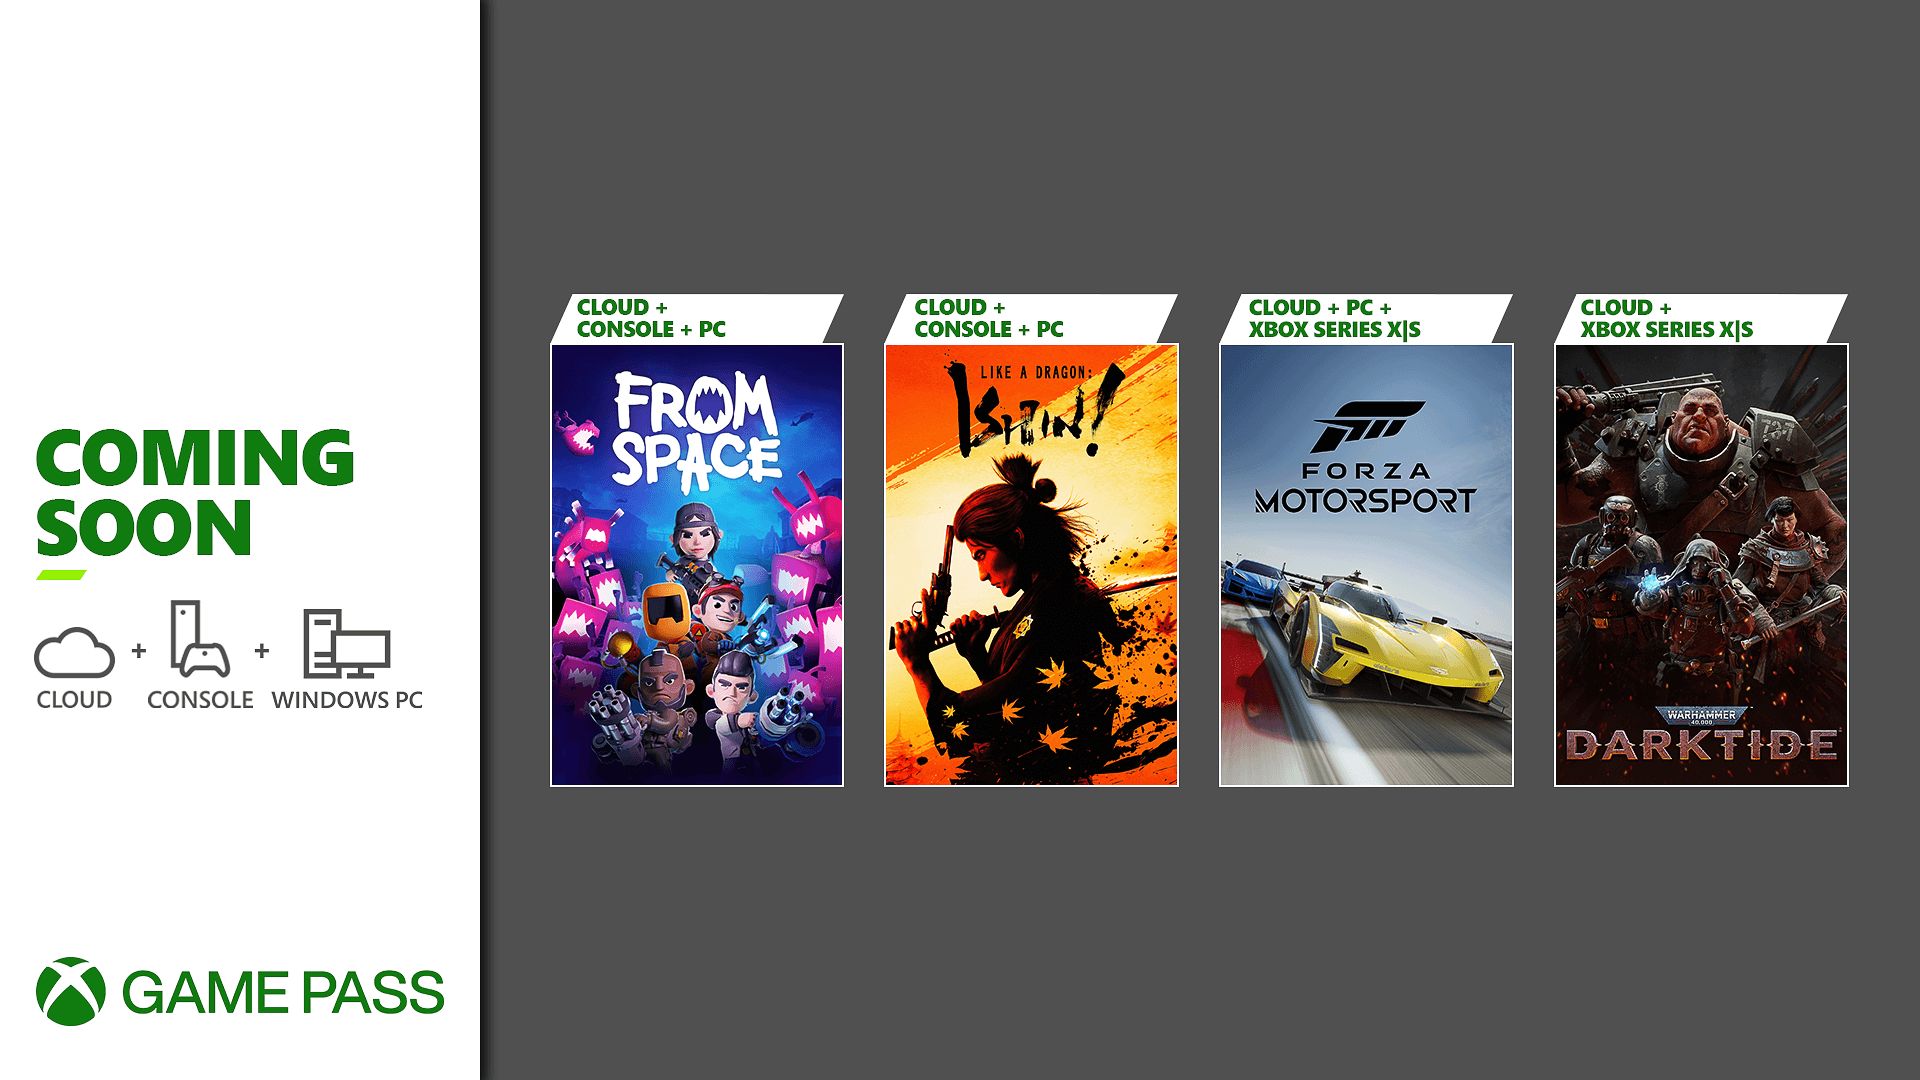 Coming Soon to Game Pass: Forza Motorsport, Like A Dragon: Ishin!,  Warhammer 40,000: Darktide, and From Space - Xbox Wire